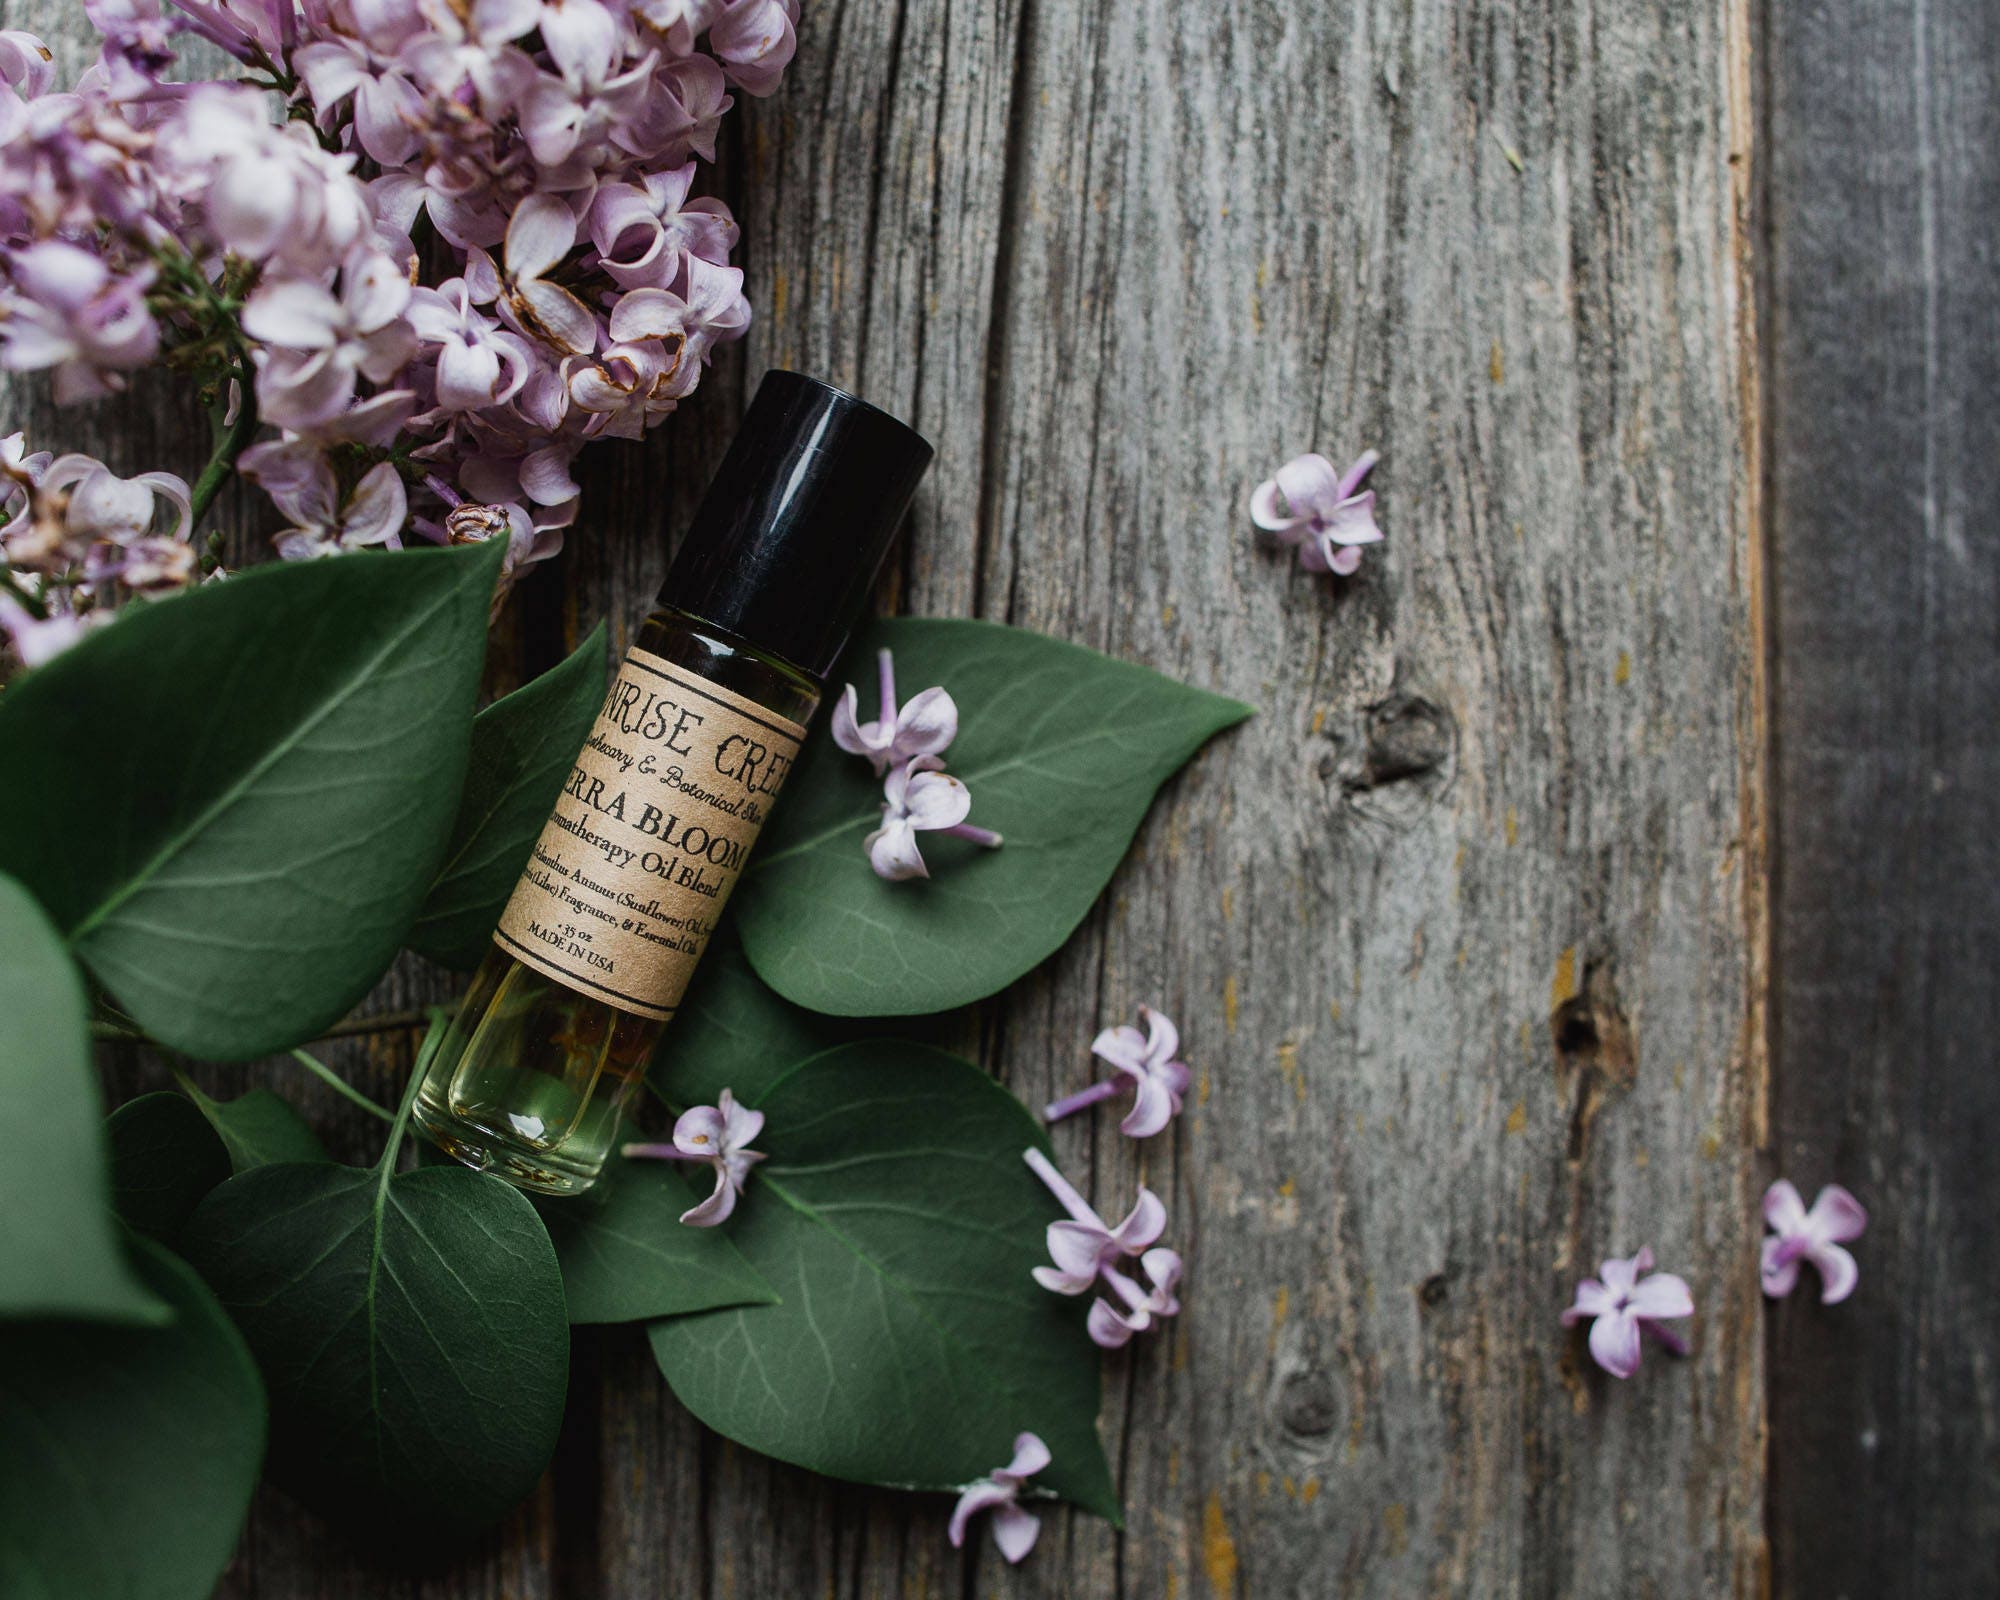 Sierra Bloom Aromatherapy Roll On Blend An Aromatic Journey Though The Sierra Nevada Mountain Foothills Vegan